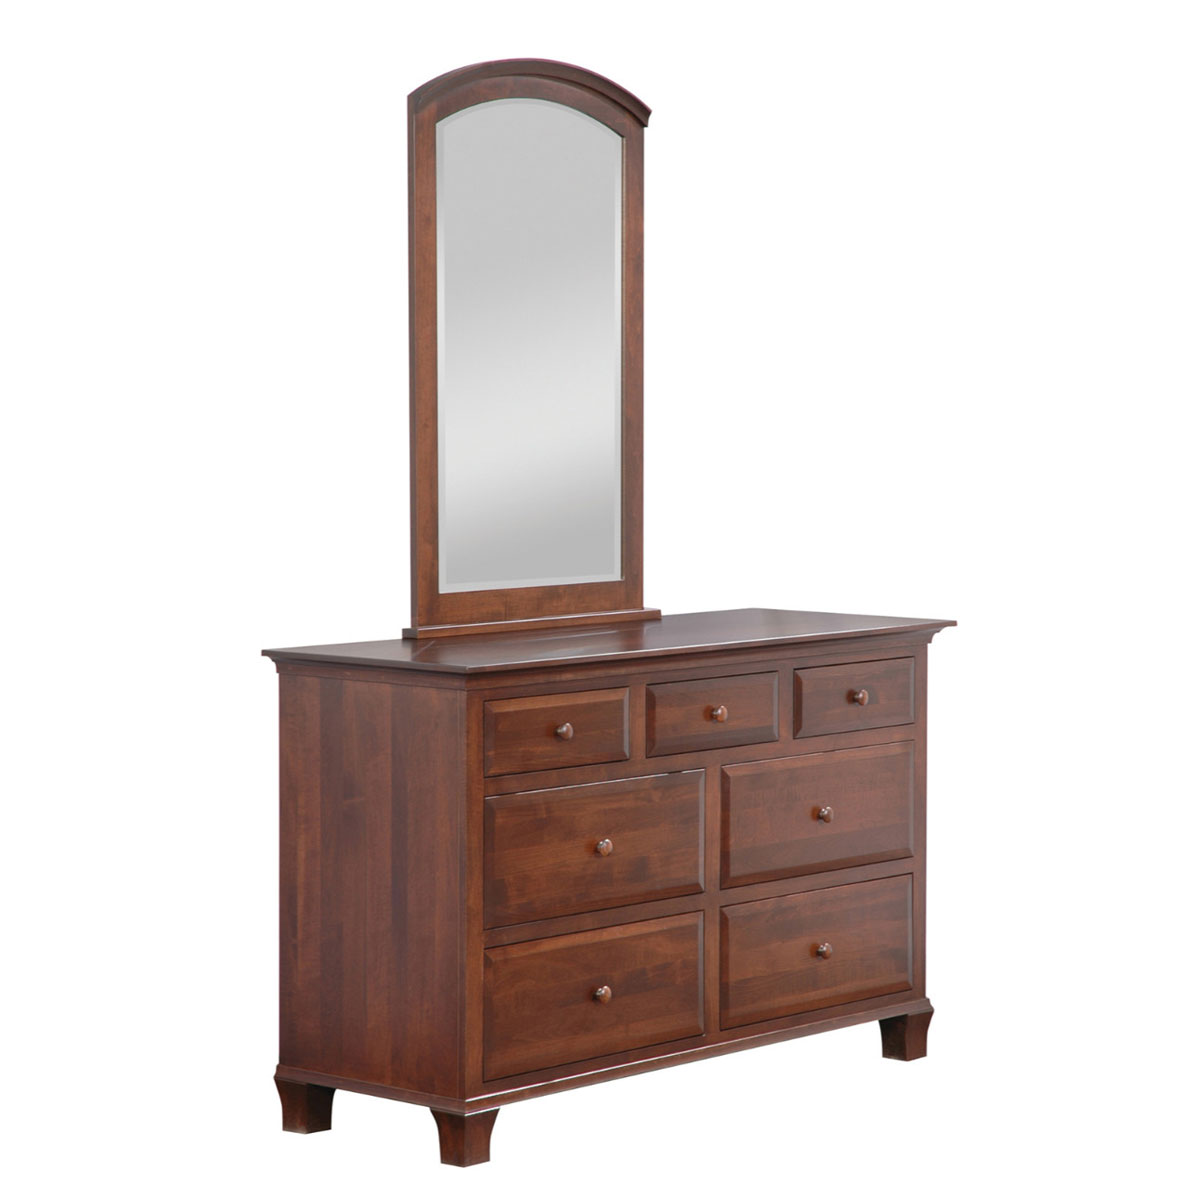 Willow 56 Inch Dresser with Arched Center Mirror